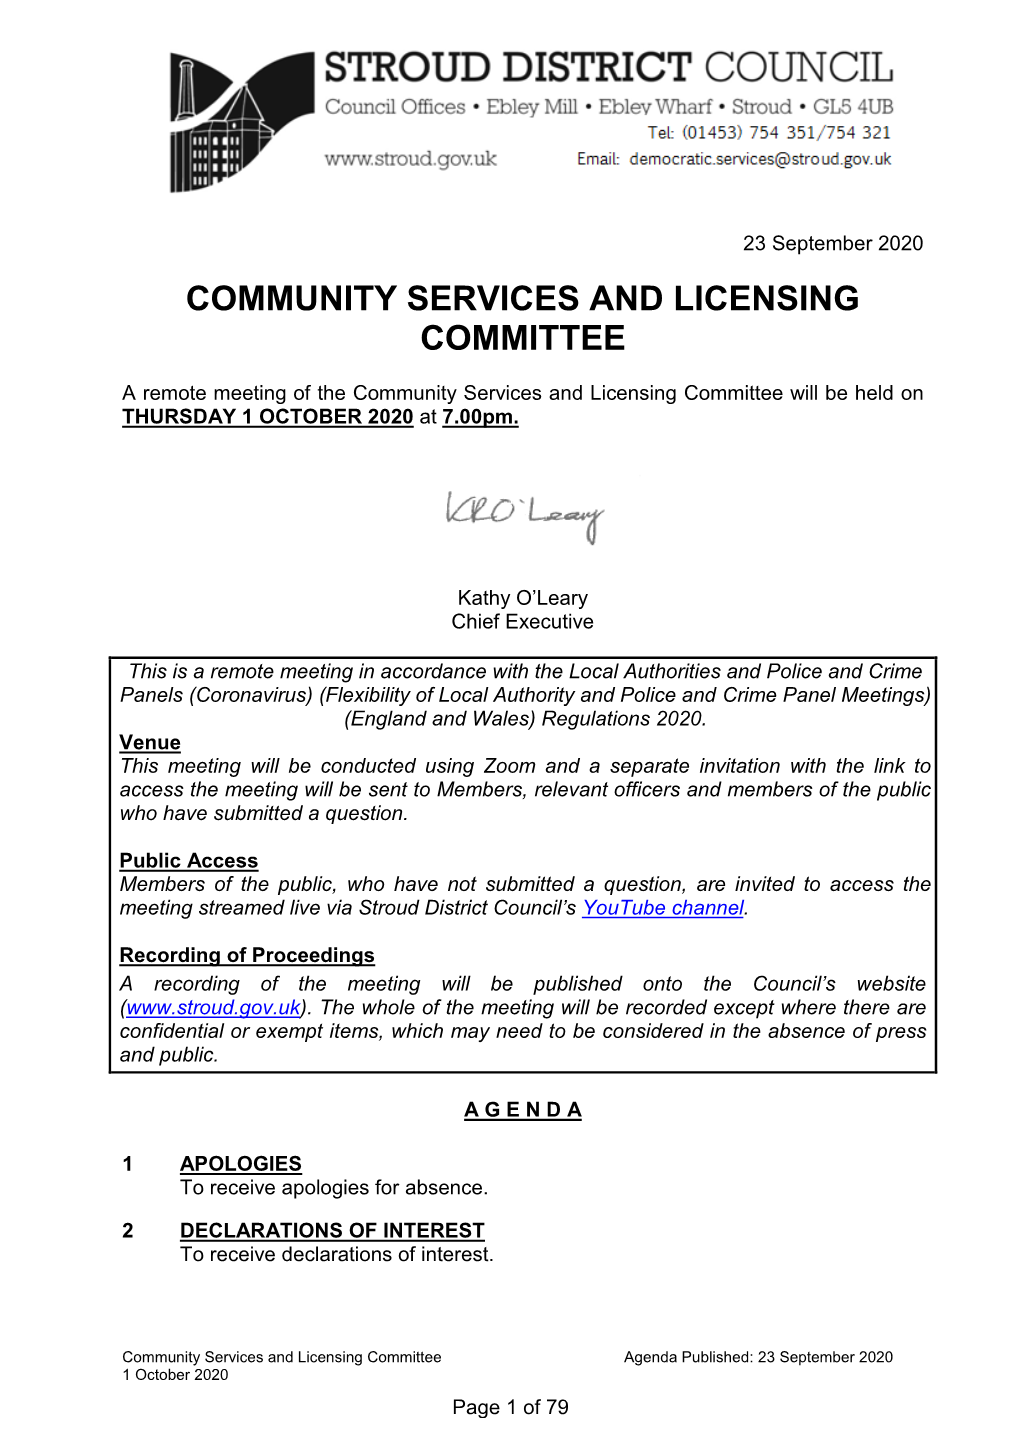 Community Services and Licensing Committee